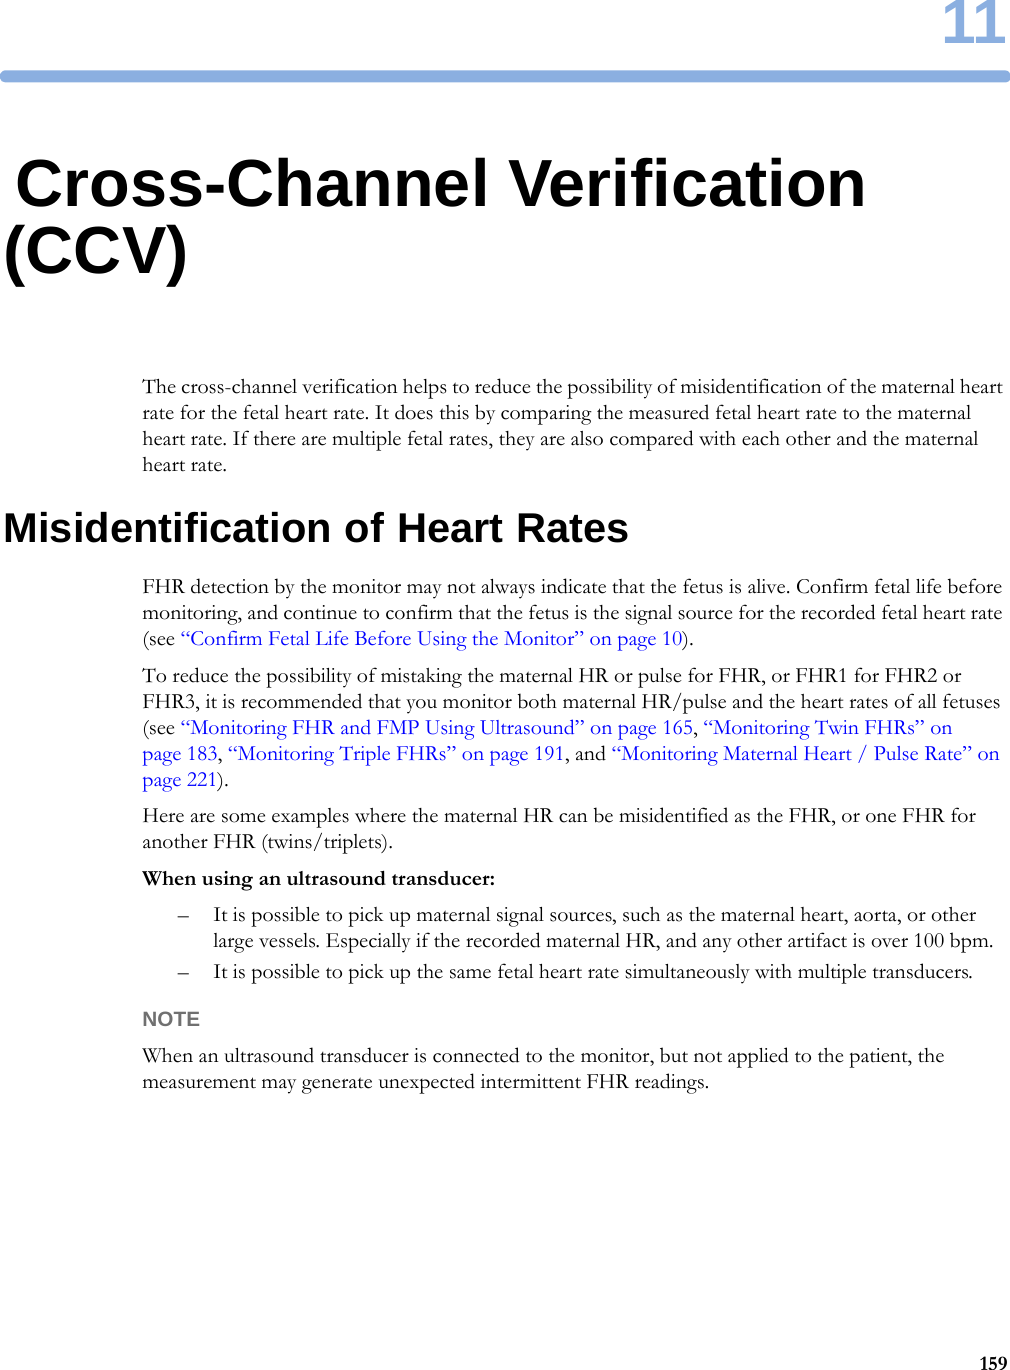 1115911Cross-Channel Verification (CCV)The cross-channel verification helps to reduce the possibility of misidentification of the maternal heart rate for the fetal heart rate. It does this by comparing the measured fetal heart rate to the maternal heart rate. If there are multiple fetal rates, they are also compared with each other and the maternal heart rate.Misidentification of Heart RatesFHR detection by the monitor may not always indicate that the fetus is alive. Confirm fetal life before monitoring, and continue to confirm that the fetus is the signal source for the recorded fetal heart rate (see “Confirm Fetal Life Before Using the Monitor” on page 10).To reduce the possibility of mistaking the maternal HR or pulse for FHR, or FHR1 for FHR2 or FHR3, it is recommended that you monitor both maternal HR/pulse and the heart rates of all fetuses (see “Monitoring FHR and FMP Using Ultrasound” on page 165, “Monitoring Twin FHRs” on page 183, “Monitoring Triple FHRs” on page 191, and “Monitoring Maternal Heart / Pulse Rate” on page 221).Here are some examples where the maternal HR can be misidentified as the FHR, or one FHR for another FHR (twins/triplets).When using an ultrasound transducer:– It is possible to pick up maternal signal sources, such as the maternal heart, aorta, or other large vessels. Especially if the recorded maternal HR, and any other artifact is over 100 bpm.– It is possible to pick up the same fetal heart rate simultaneously with multiple transducers.NOTEWhen an ultrasound transducer is connected to the monitor, but not applied to the patient, the measurement may generate unexpected intermittent FHR readings.